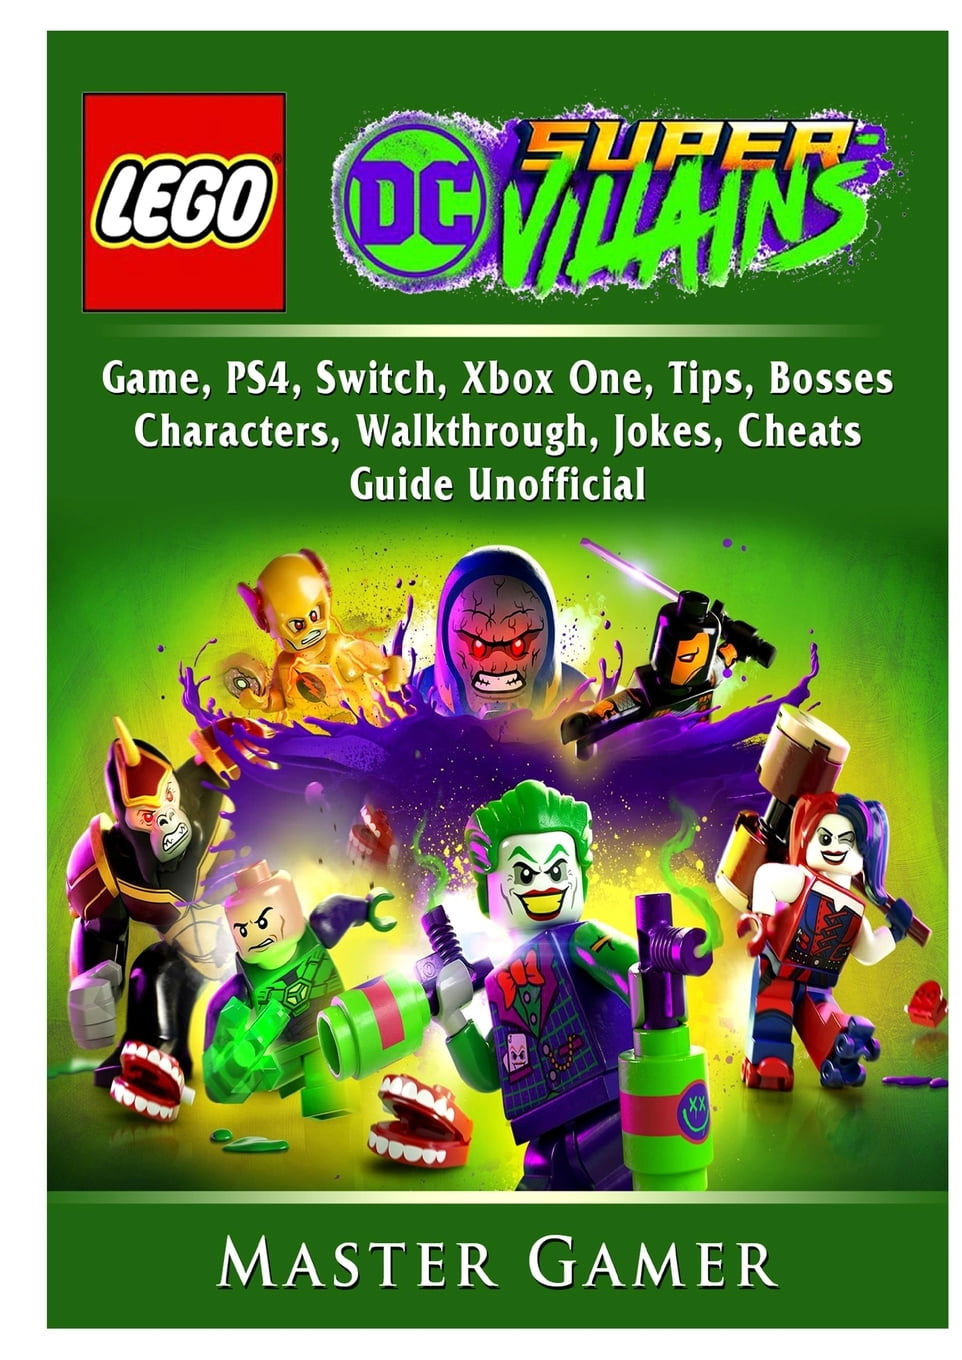 Lego DC Super Villains Game, Ps4, Switch, Xbox One, Tips, Bosses, Characters, Jokes, Guide Unofficial (Paperback) -